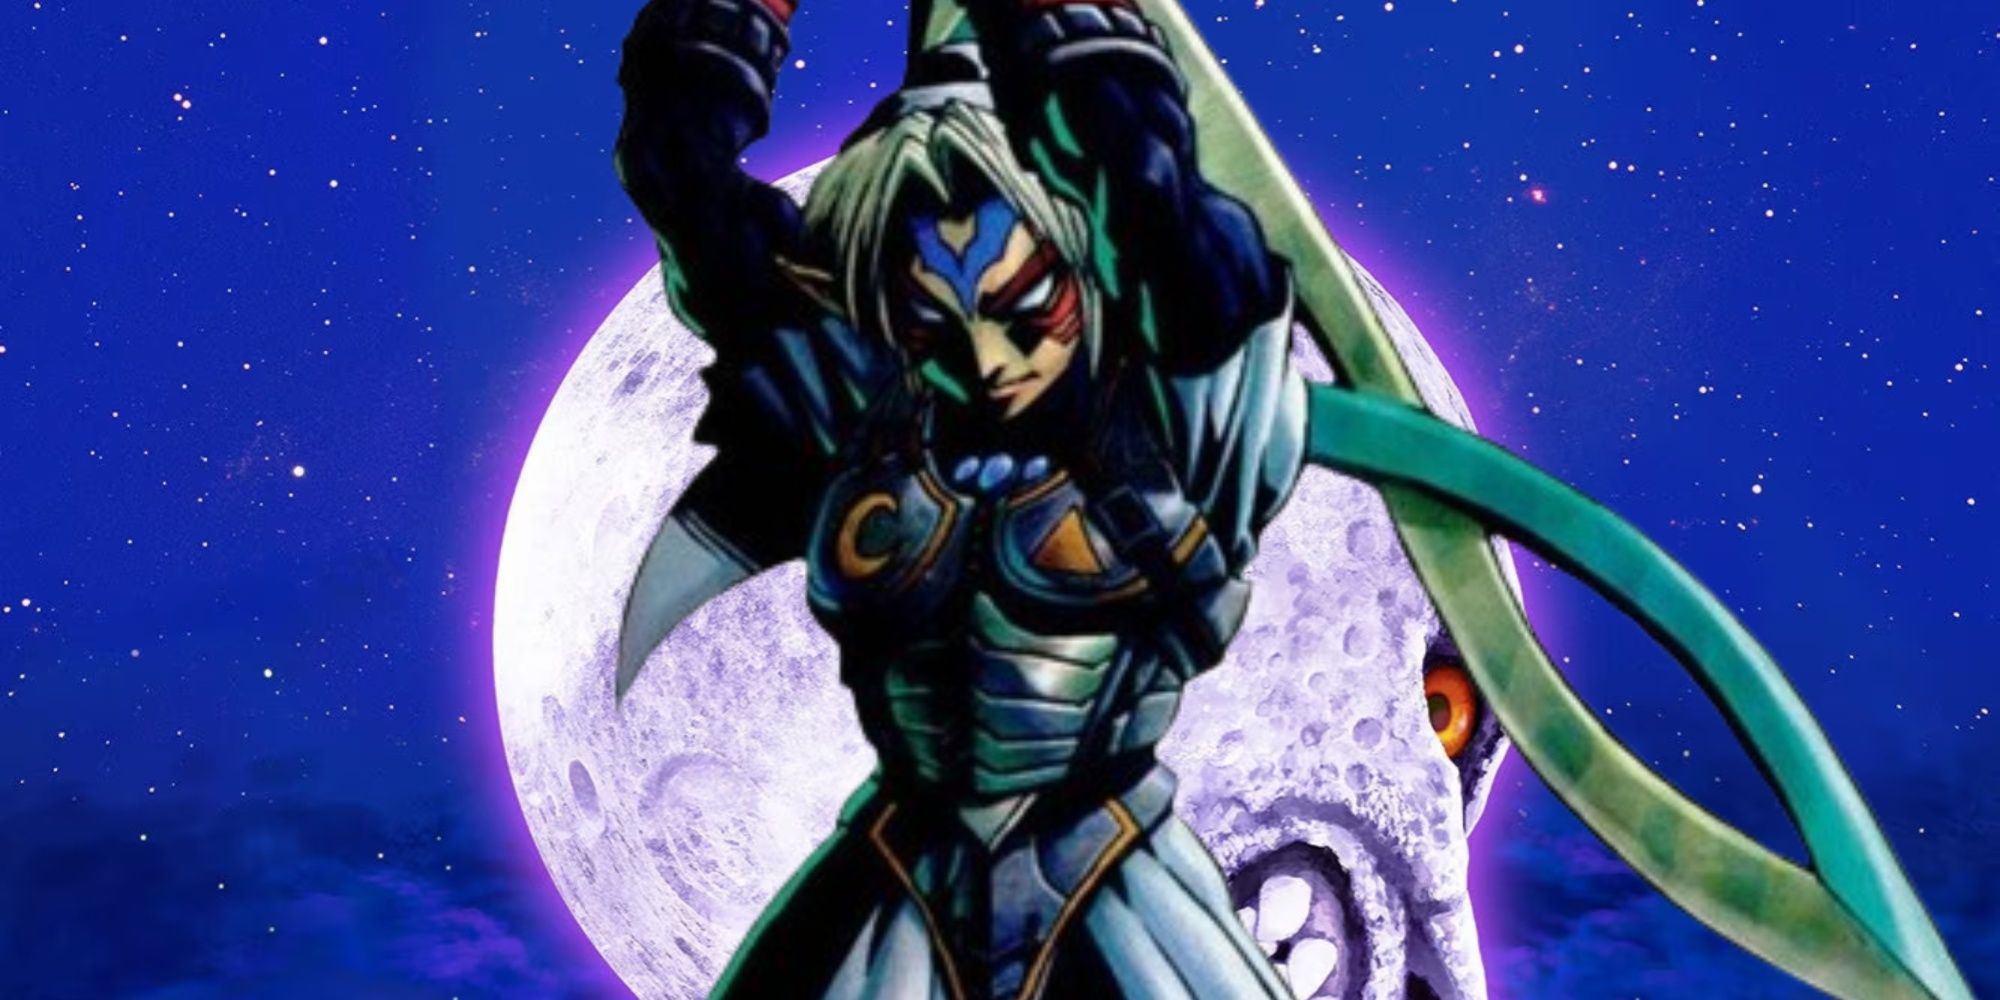 official art of the fierce deity in front of the majora's mask moon in the night sky